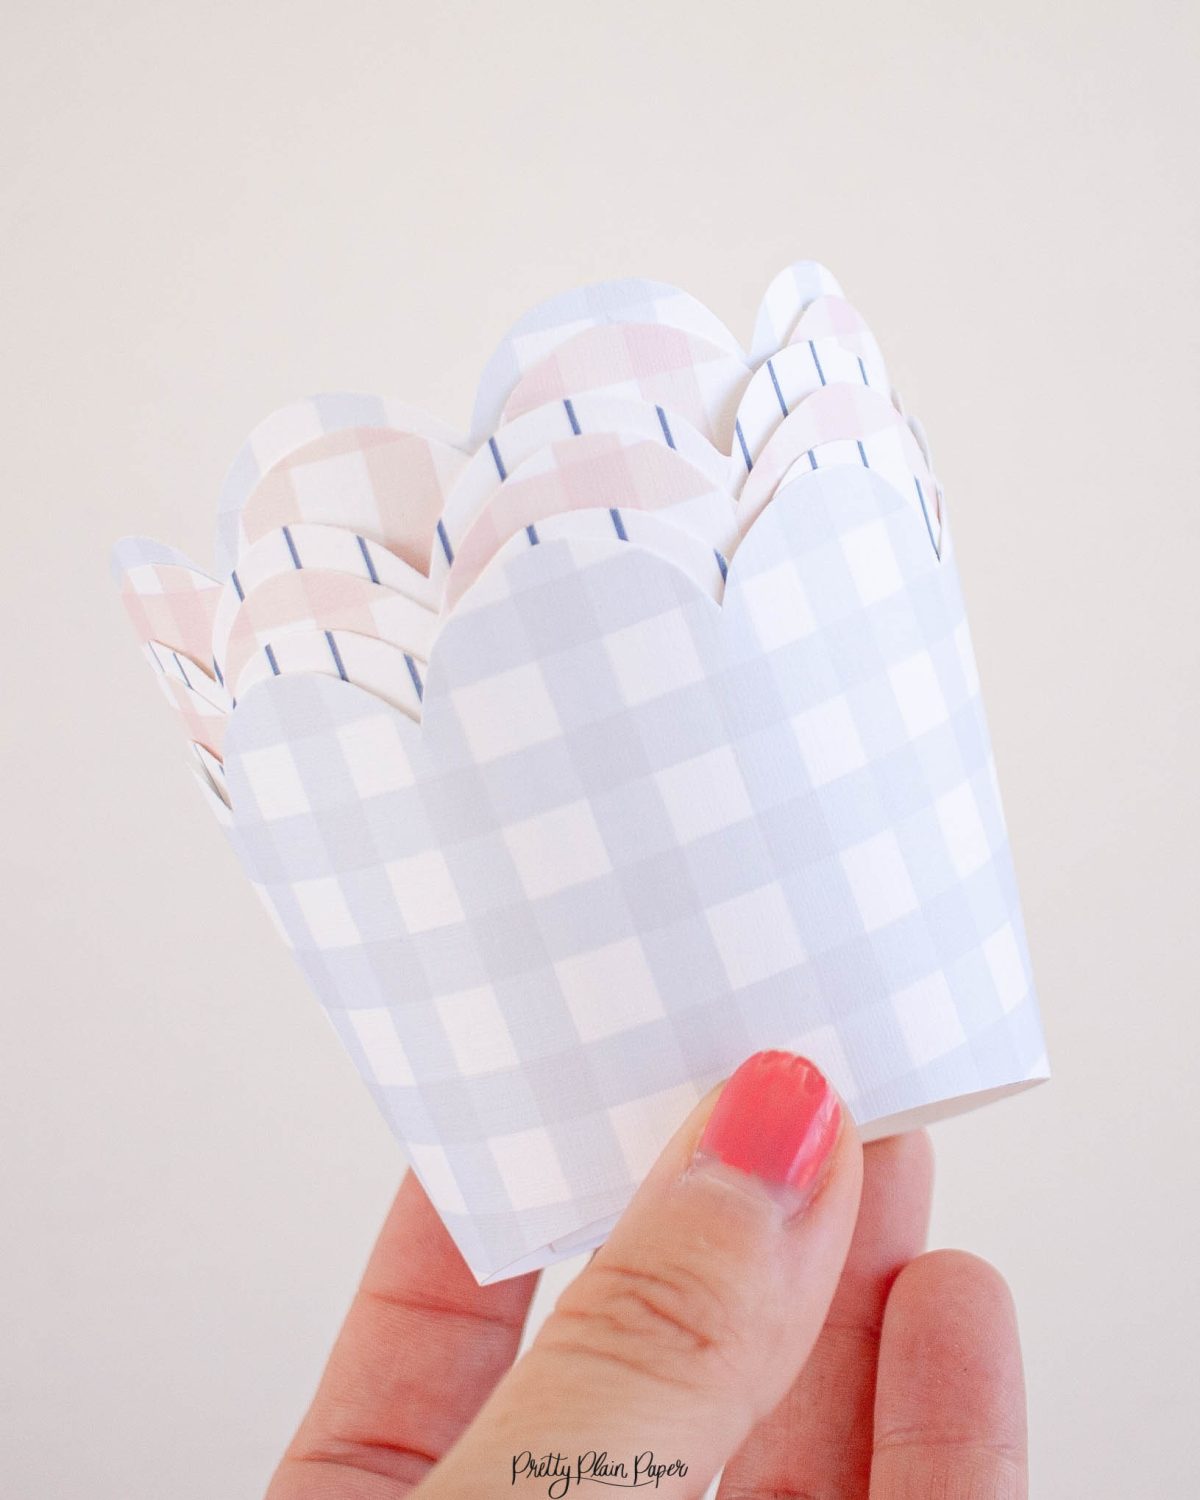 Gingham Pattern Party Printable Cupcake Wrappers by Pretty Plain Paper